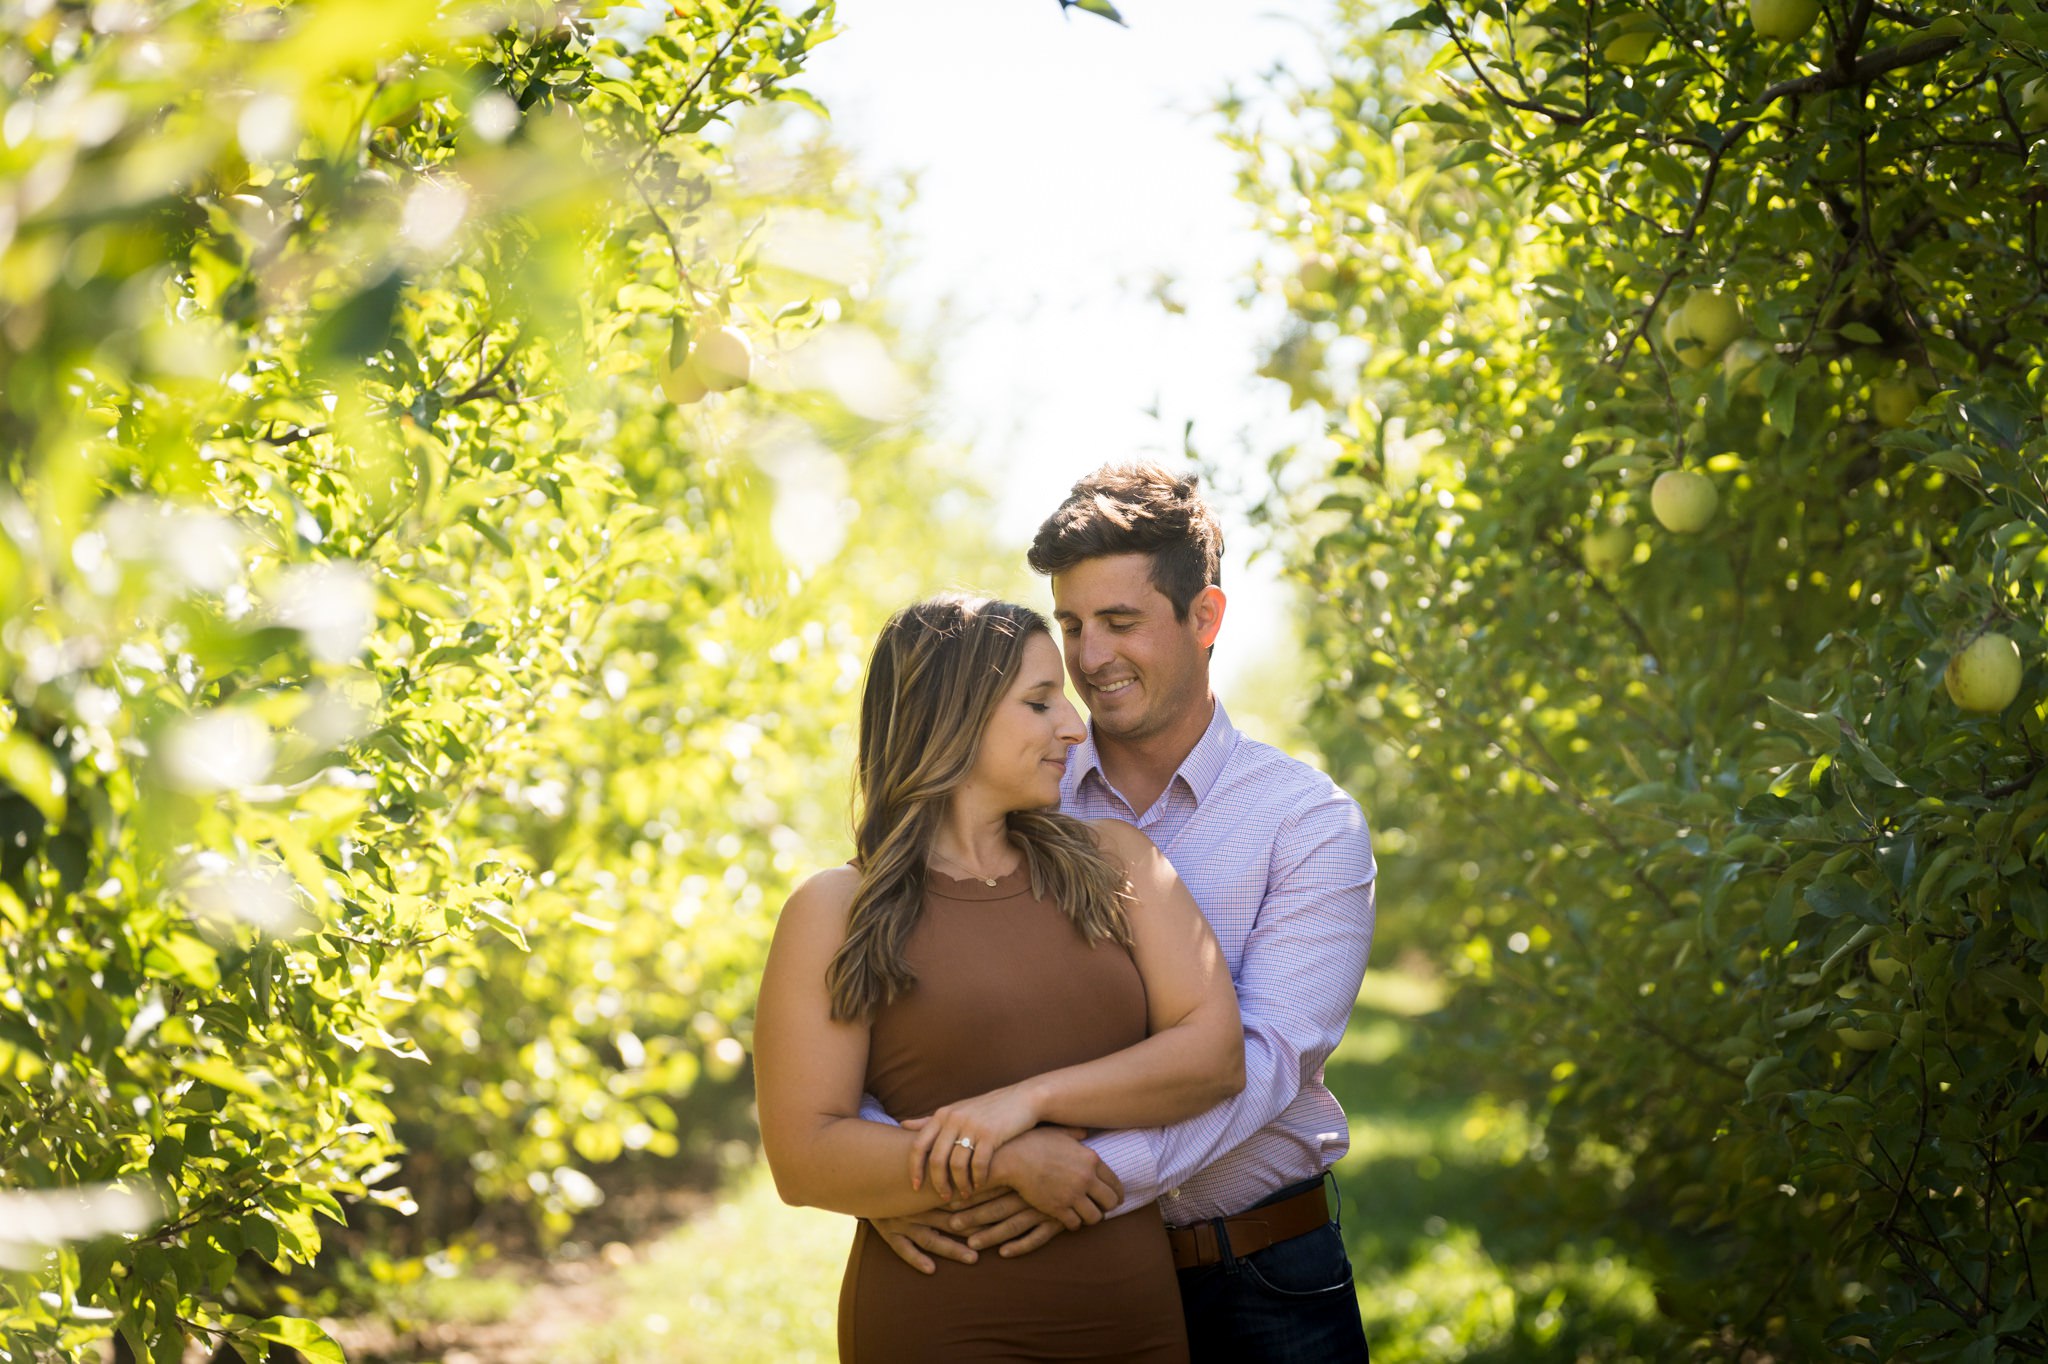 Standing in rows of apple trees, a couple embraces during their Blake's Apple Orchard engagement session.